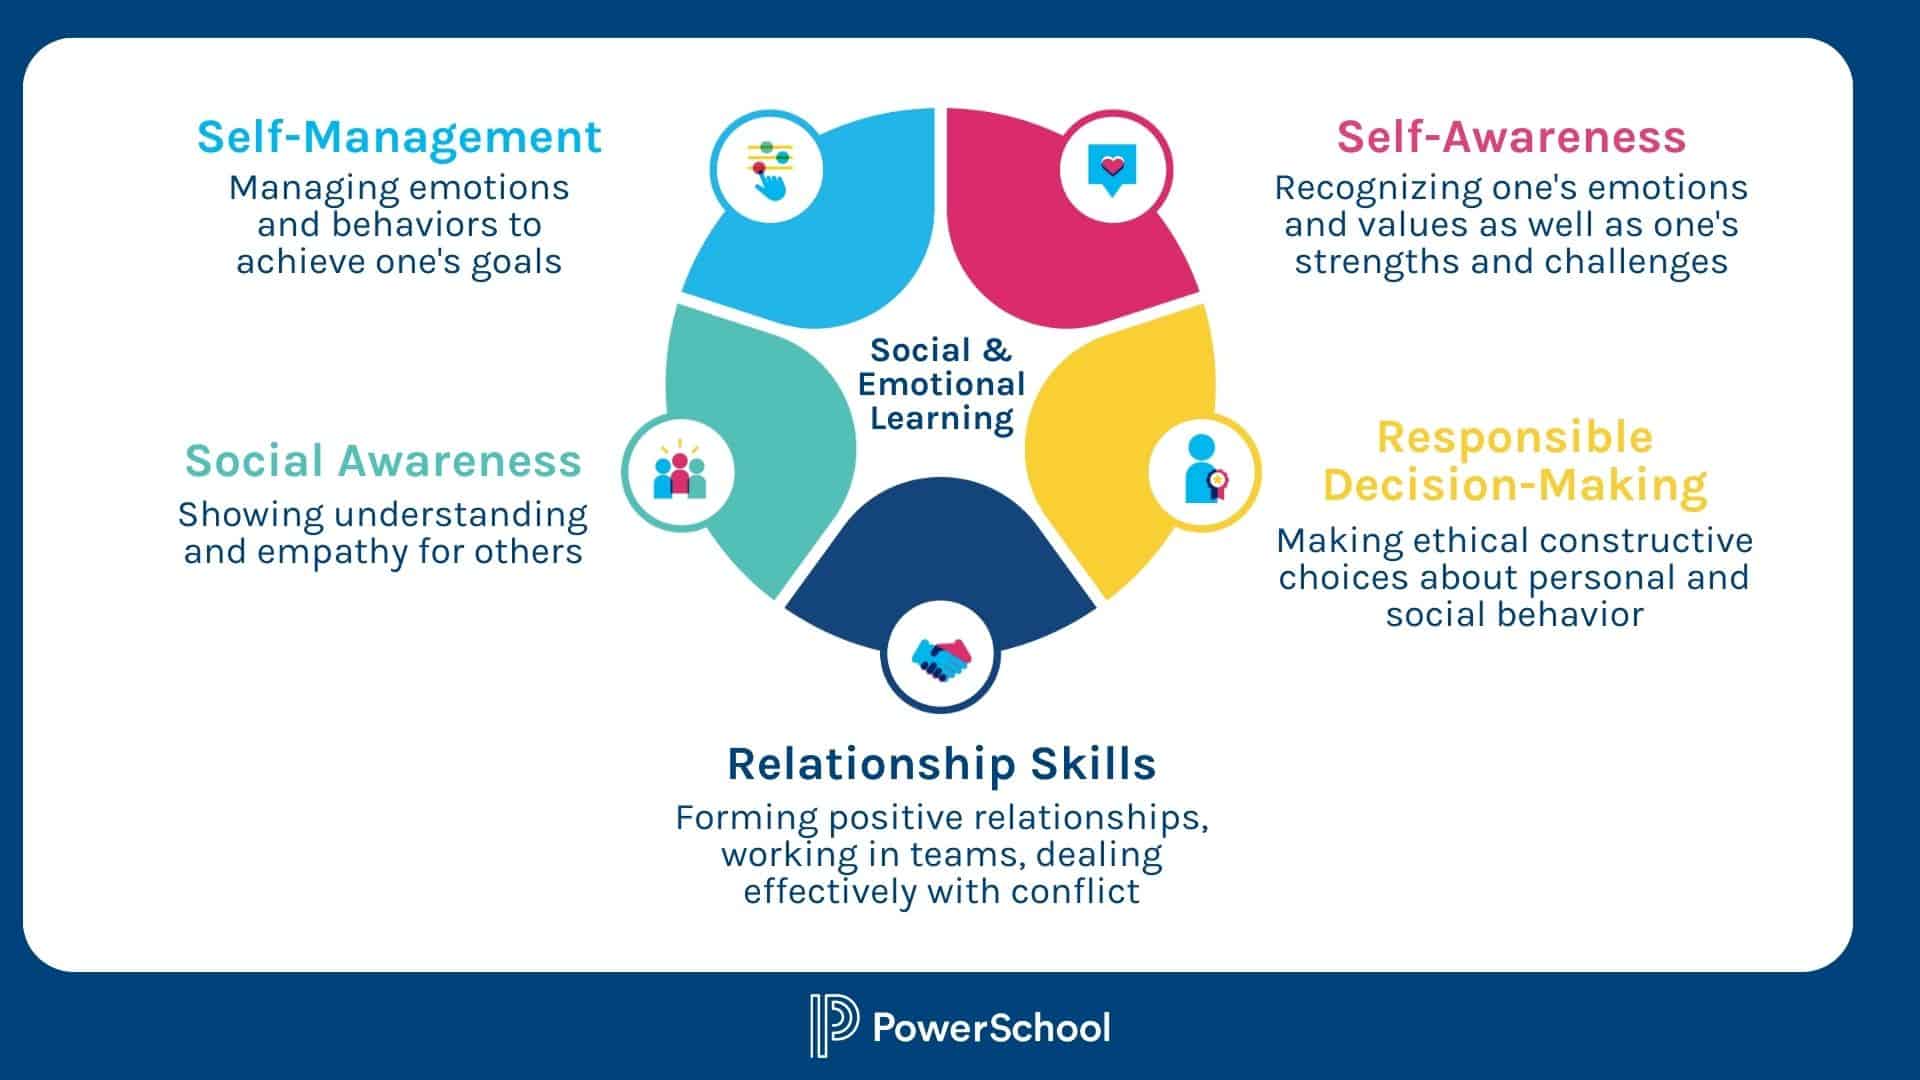 What Is Social-Emotional Learning (Sel)? Why Is Sel Important?